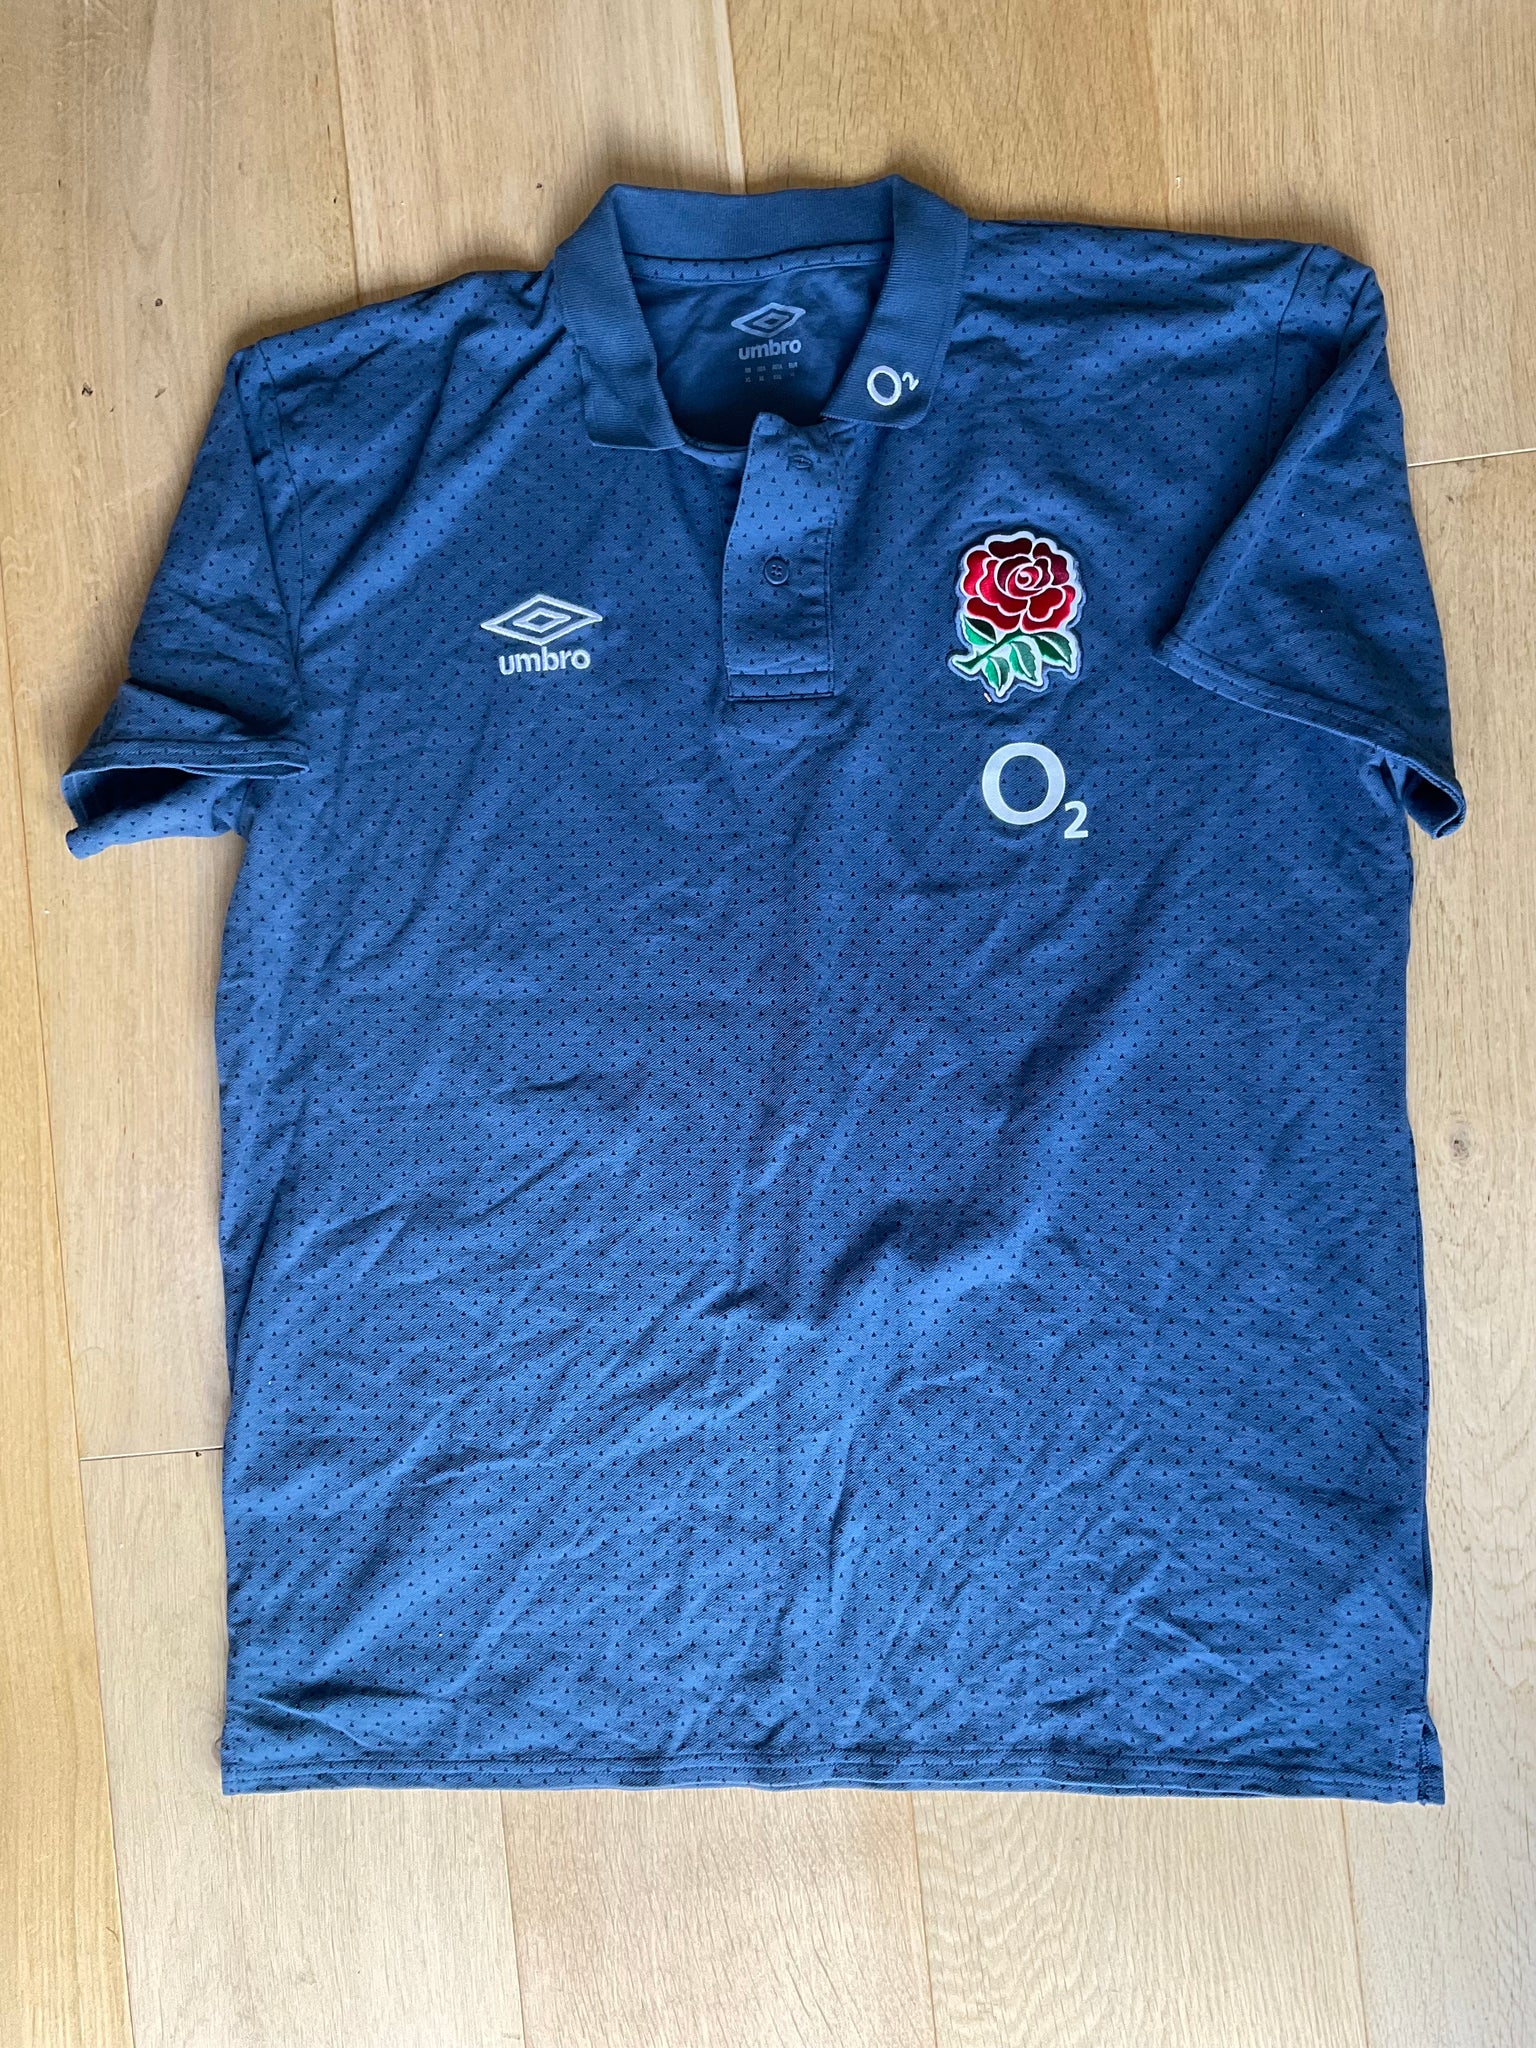 England Rugby - Polo Shirt [Navy and Mid Blue]